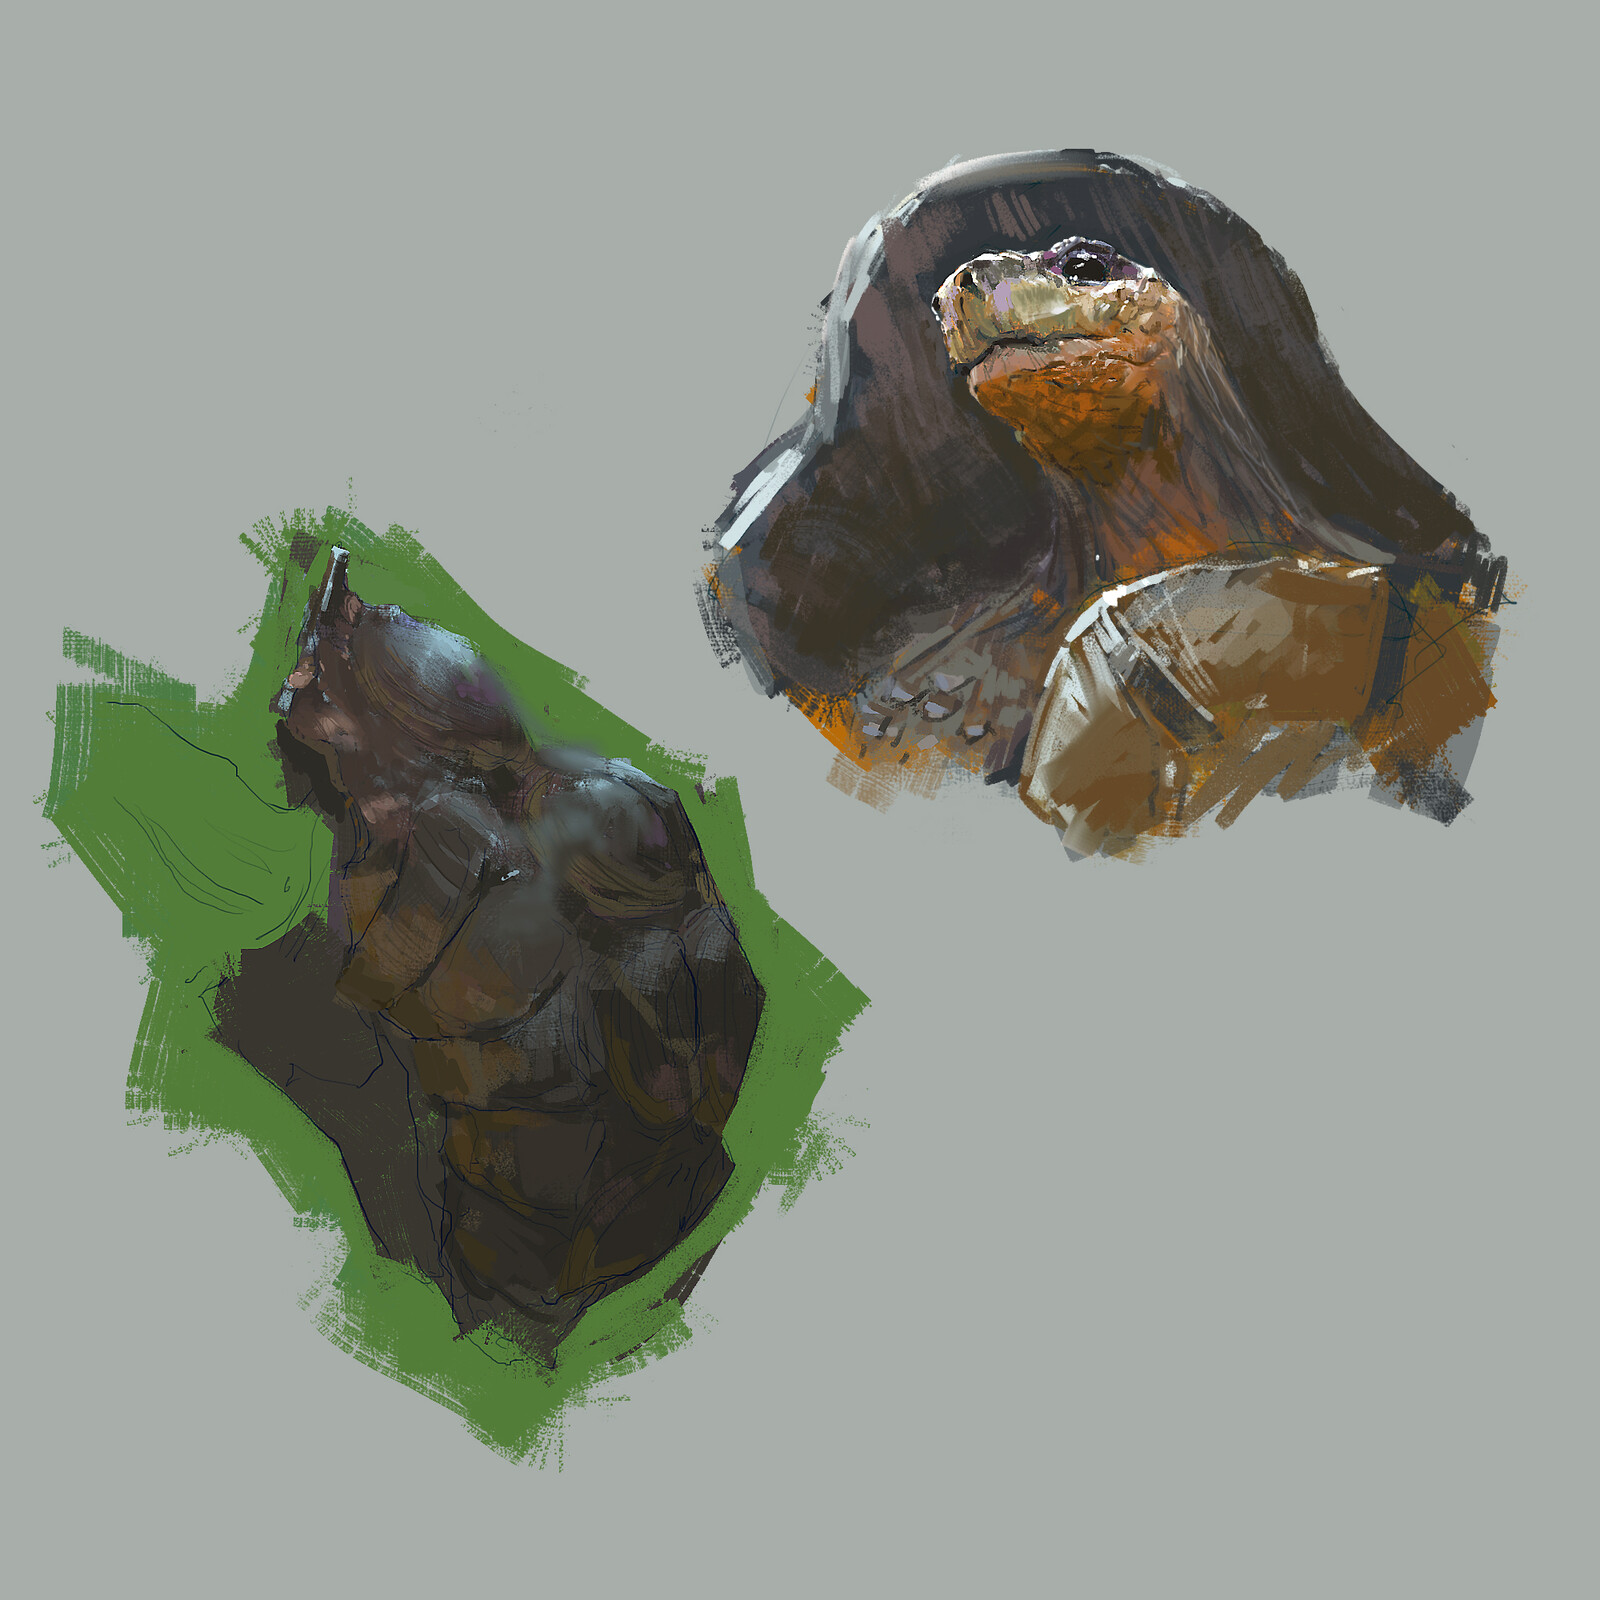 tortle studies, since I don't know how to paint them. 